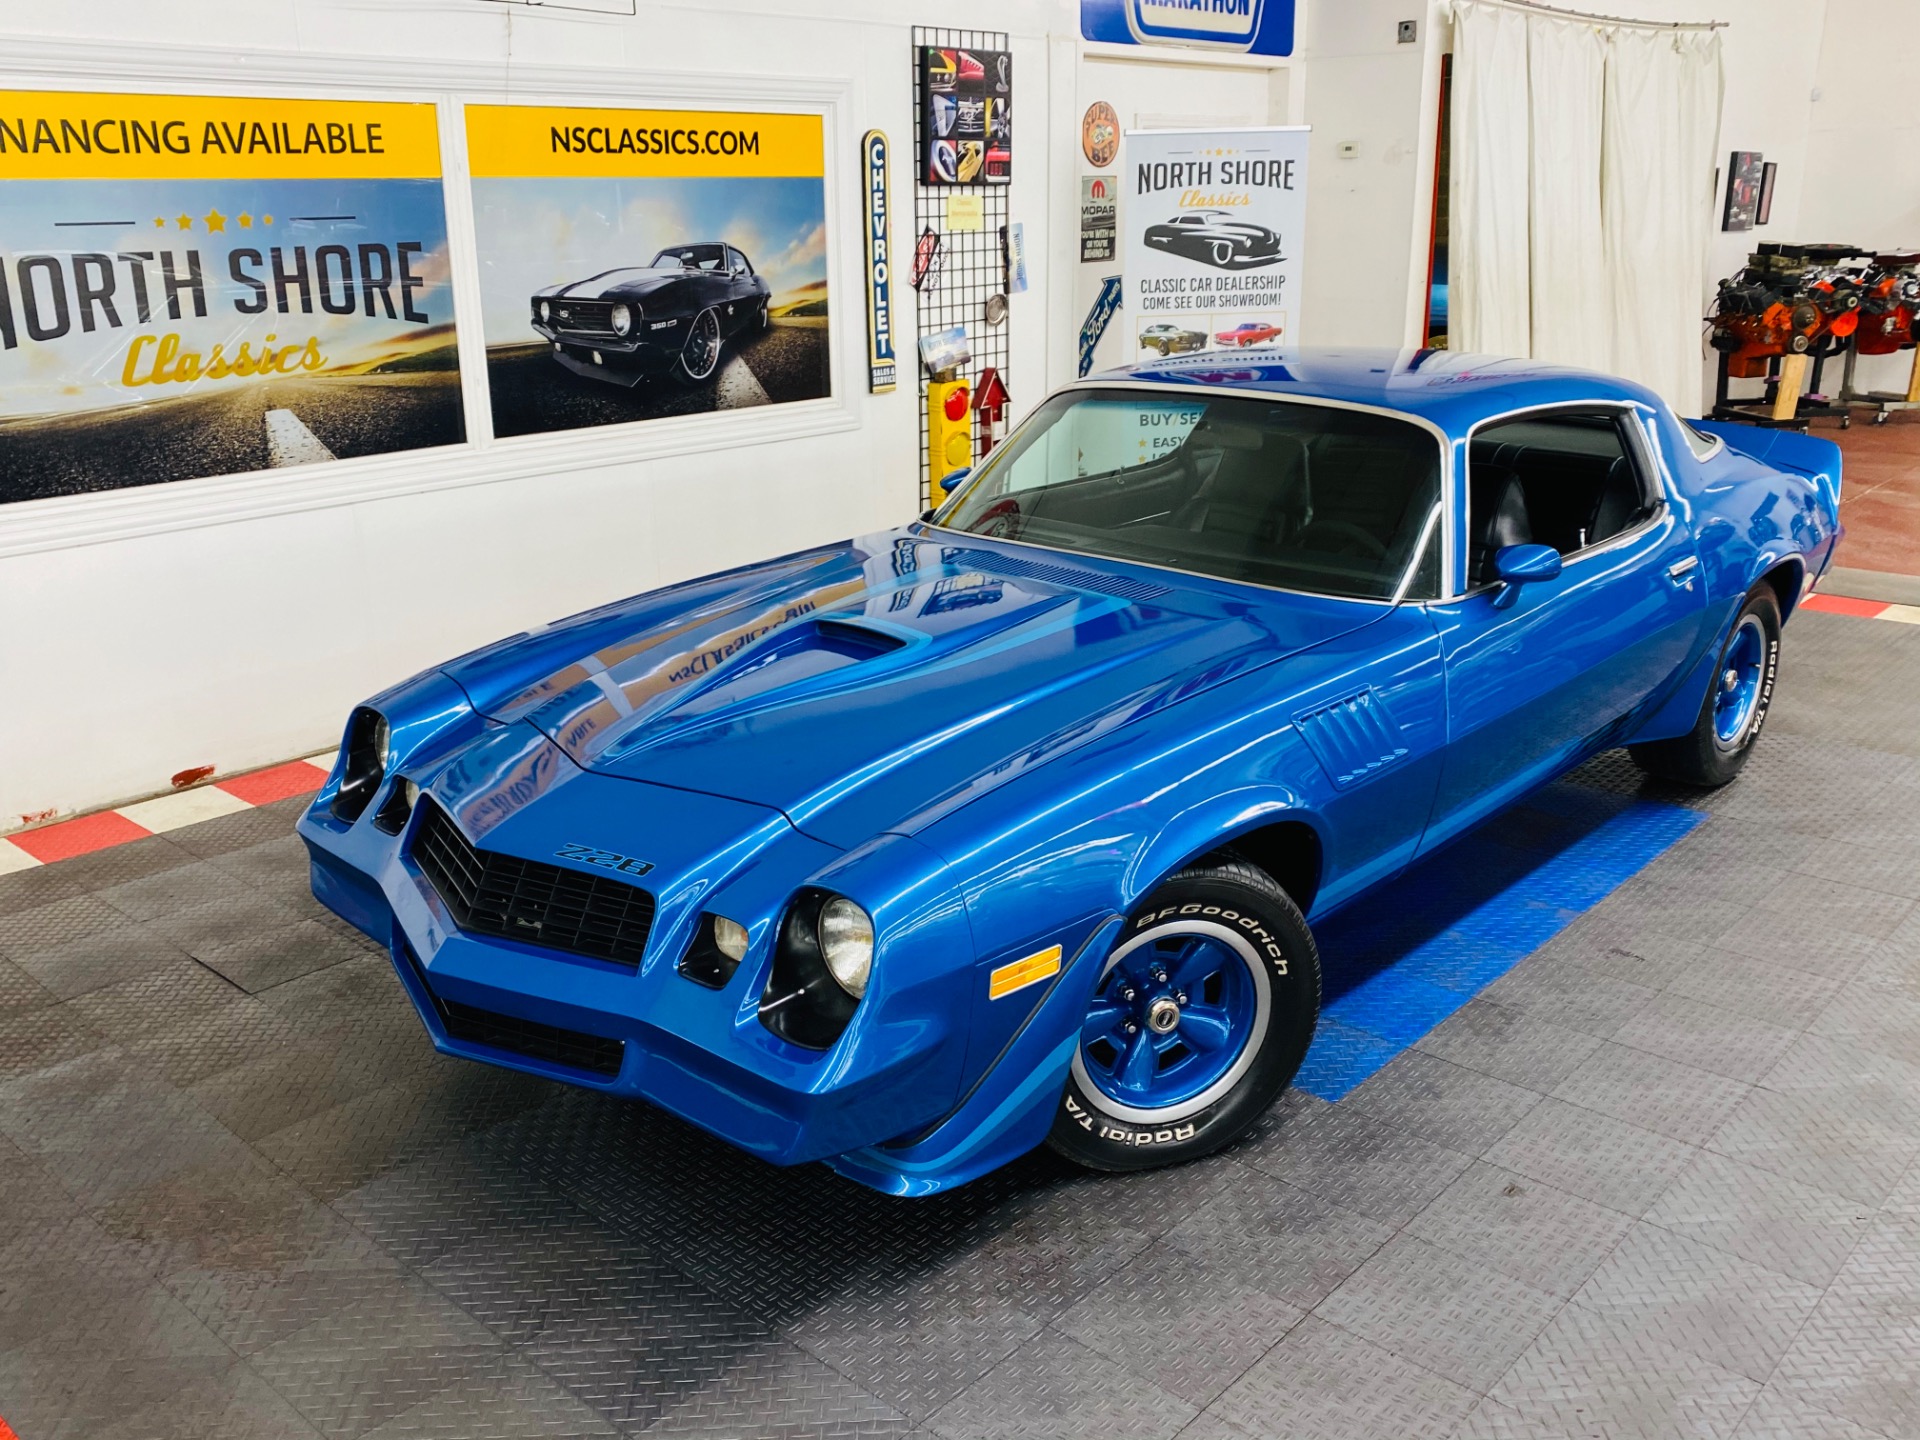 Used 1979 Chevrolet Camaro - Z28 TRIBUTE - CLEAN SOUTHERN CAR - SEE VIDEO  For Sale (Sold) | North Shore Classics Stock #79099NSC